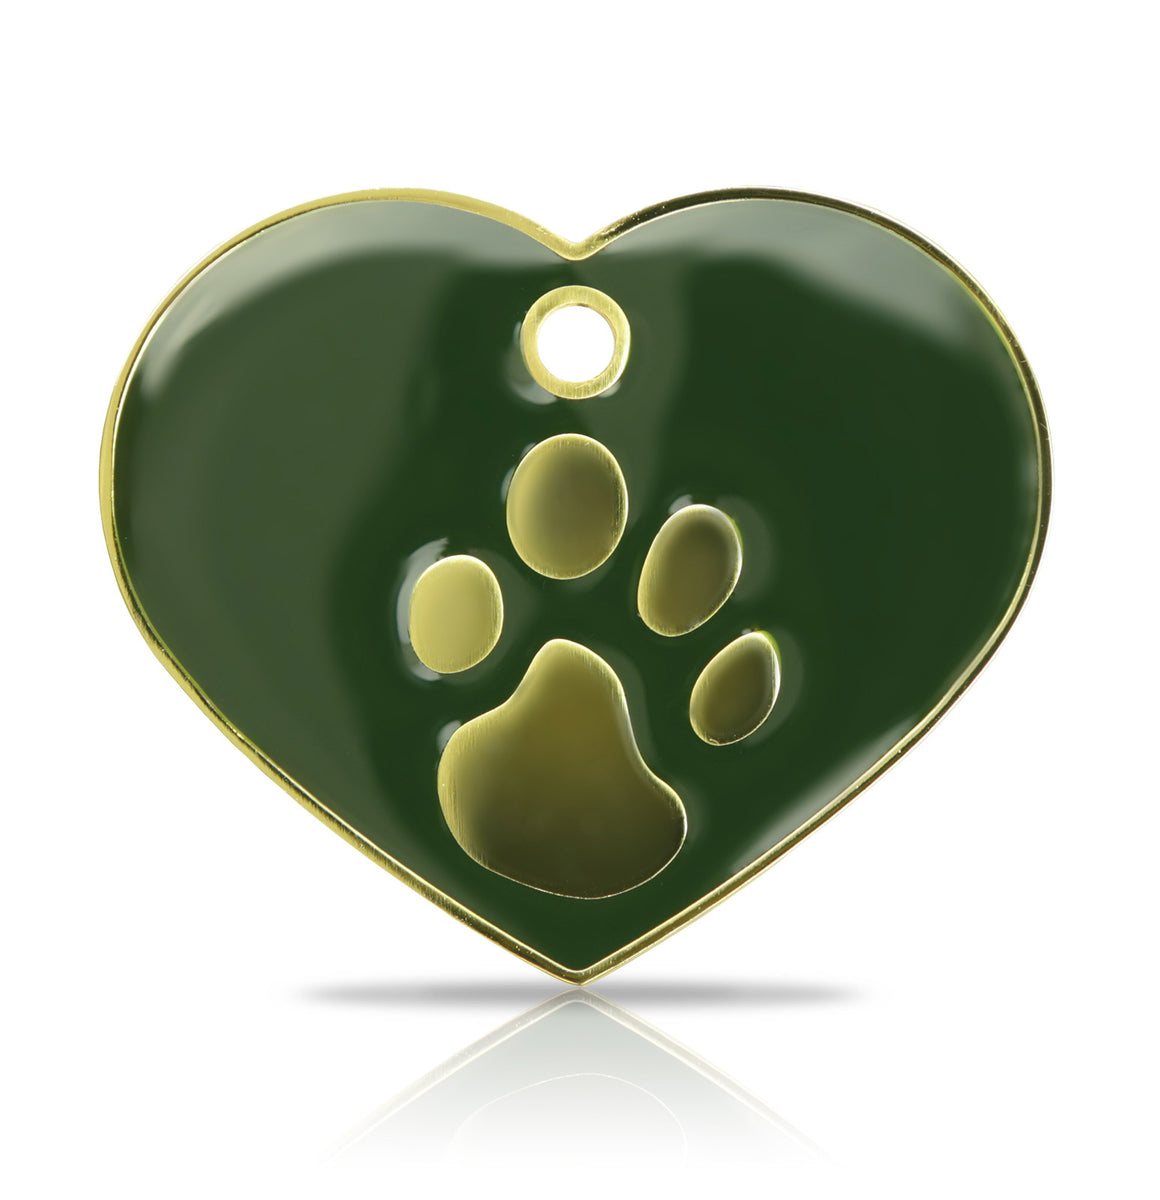 TaggIT Elegance Large Heart Green & Gold iMarc Pet Tag